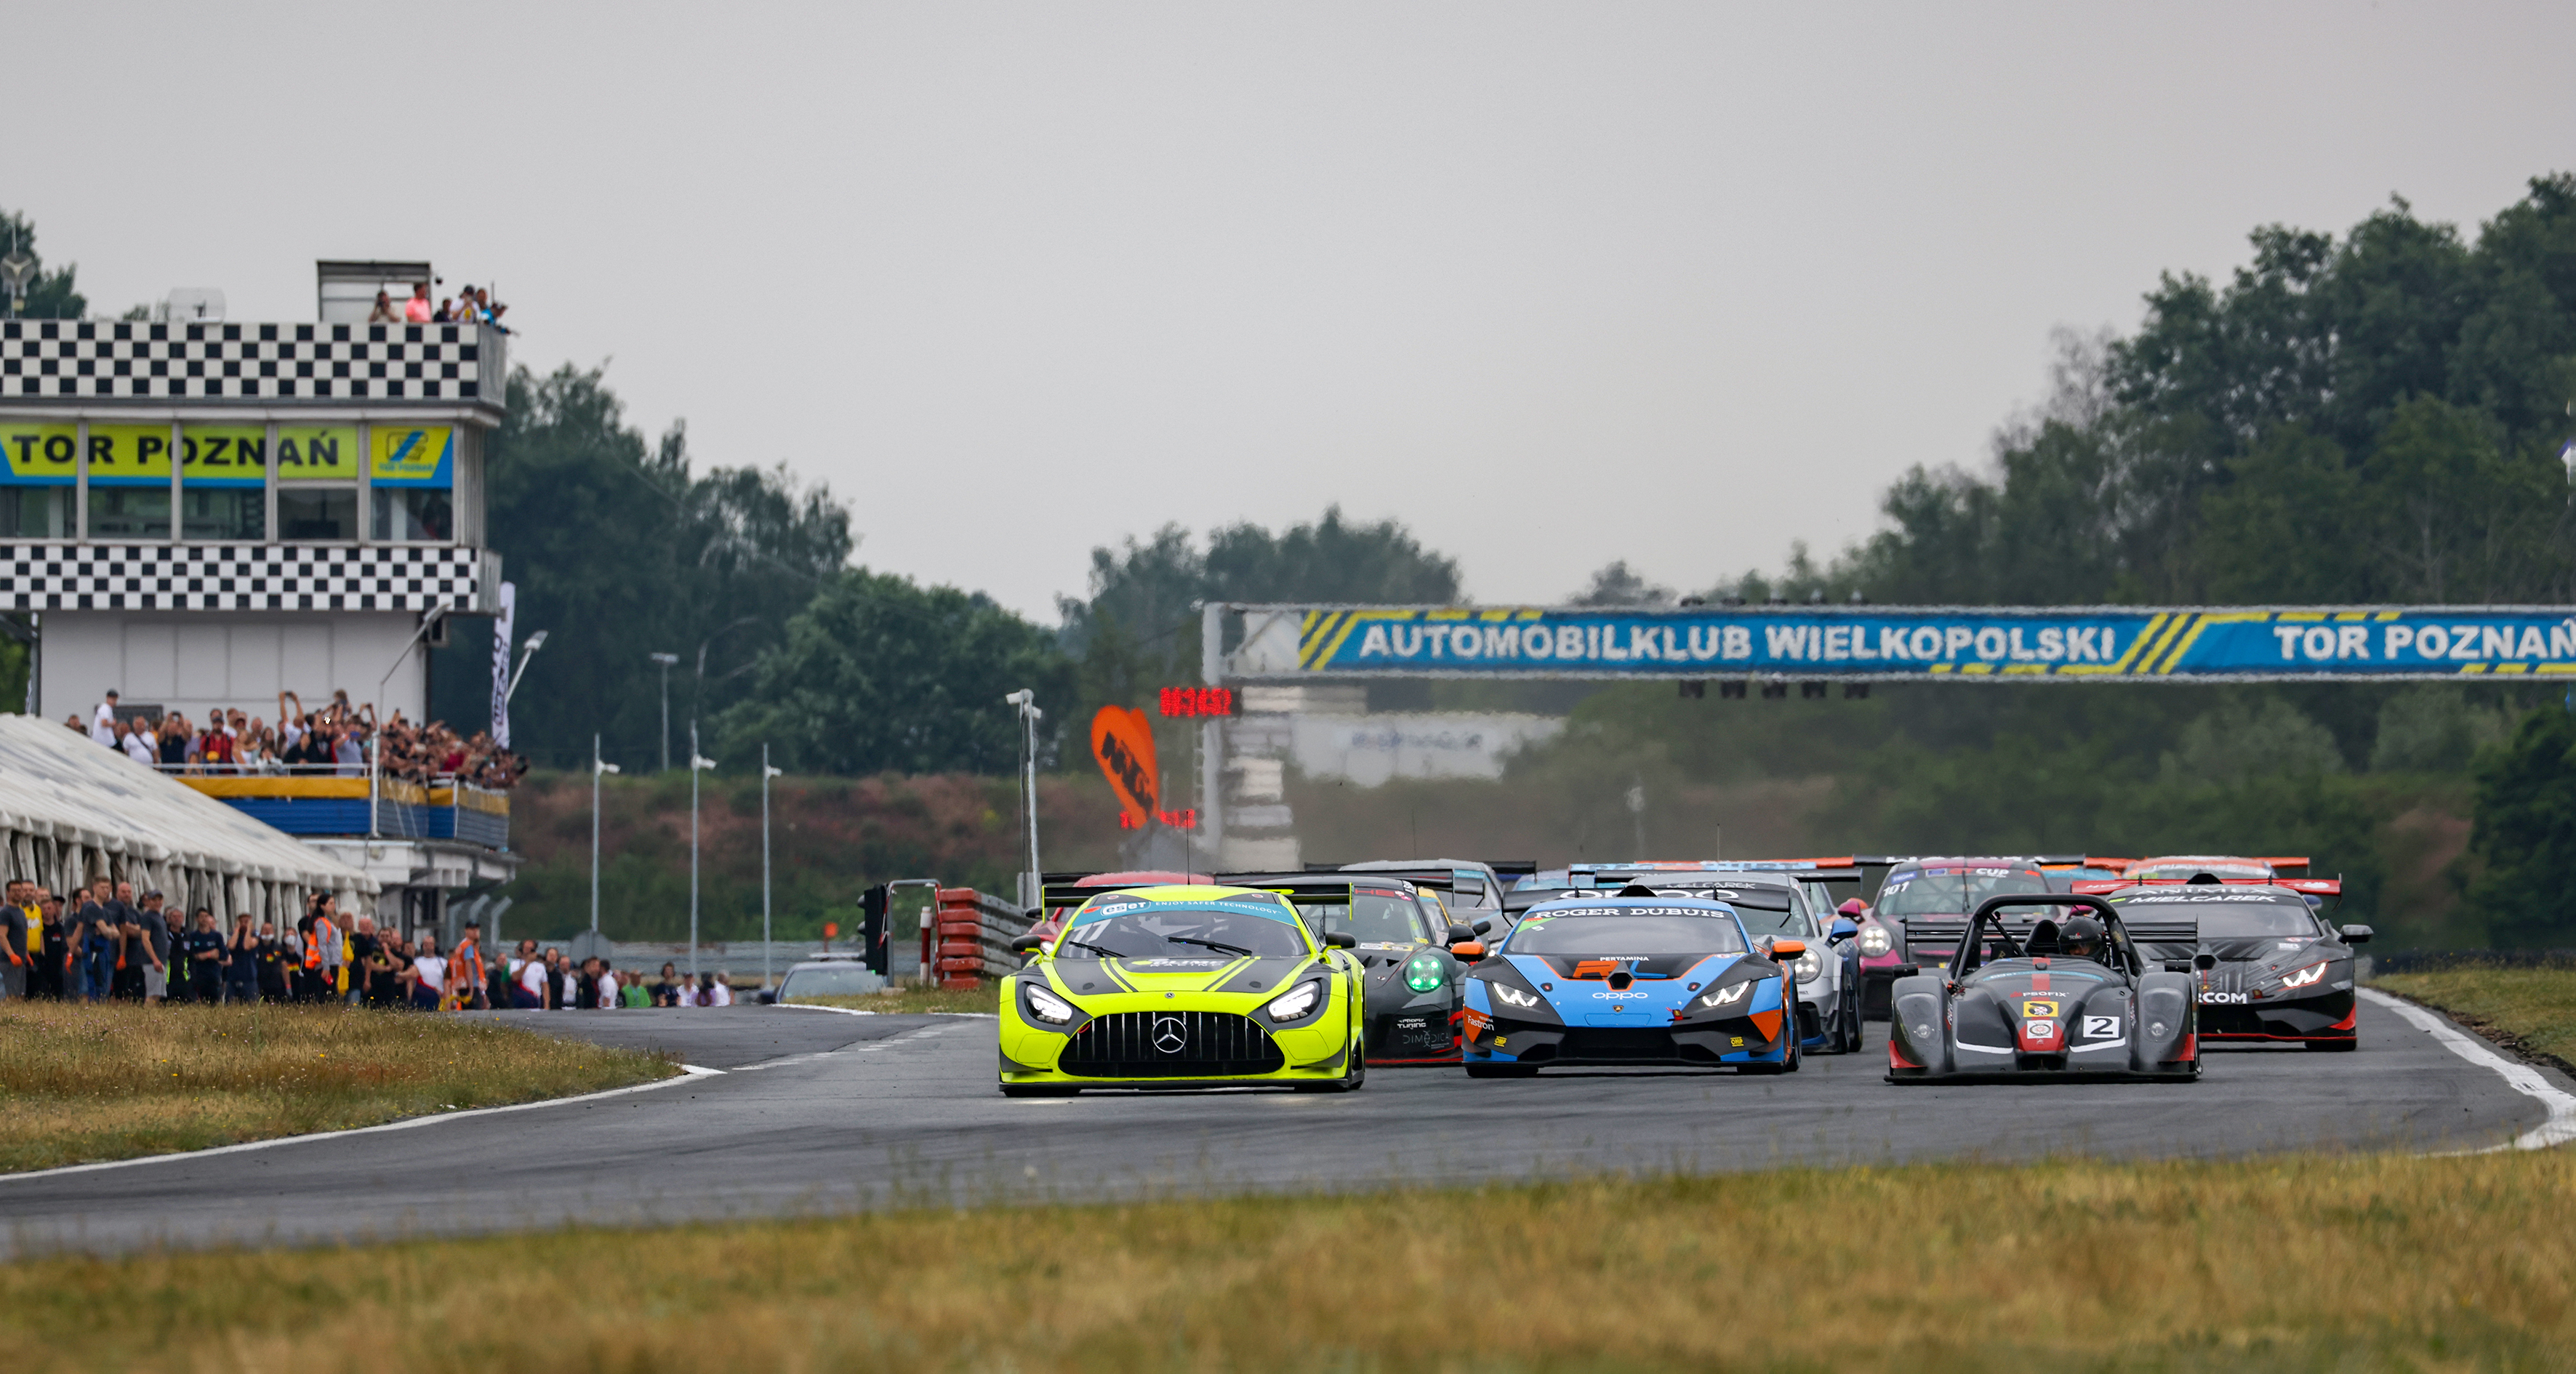 Is Libor Milota going to stay in the lead of GT3 class? The weekend in Poznan will show.